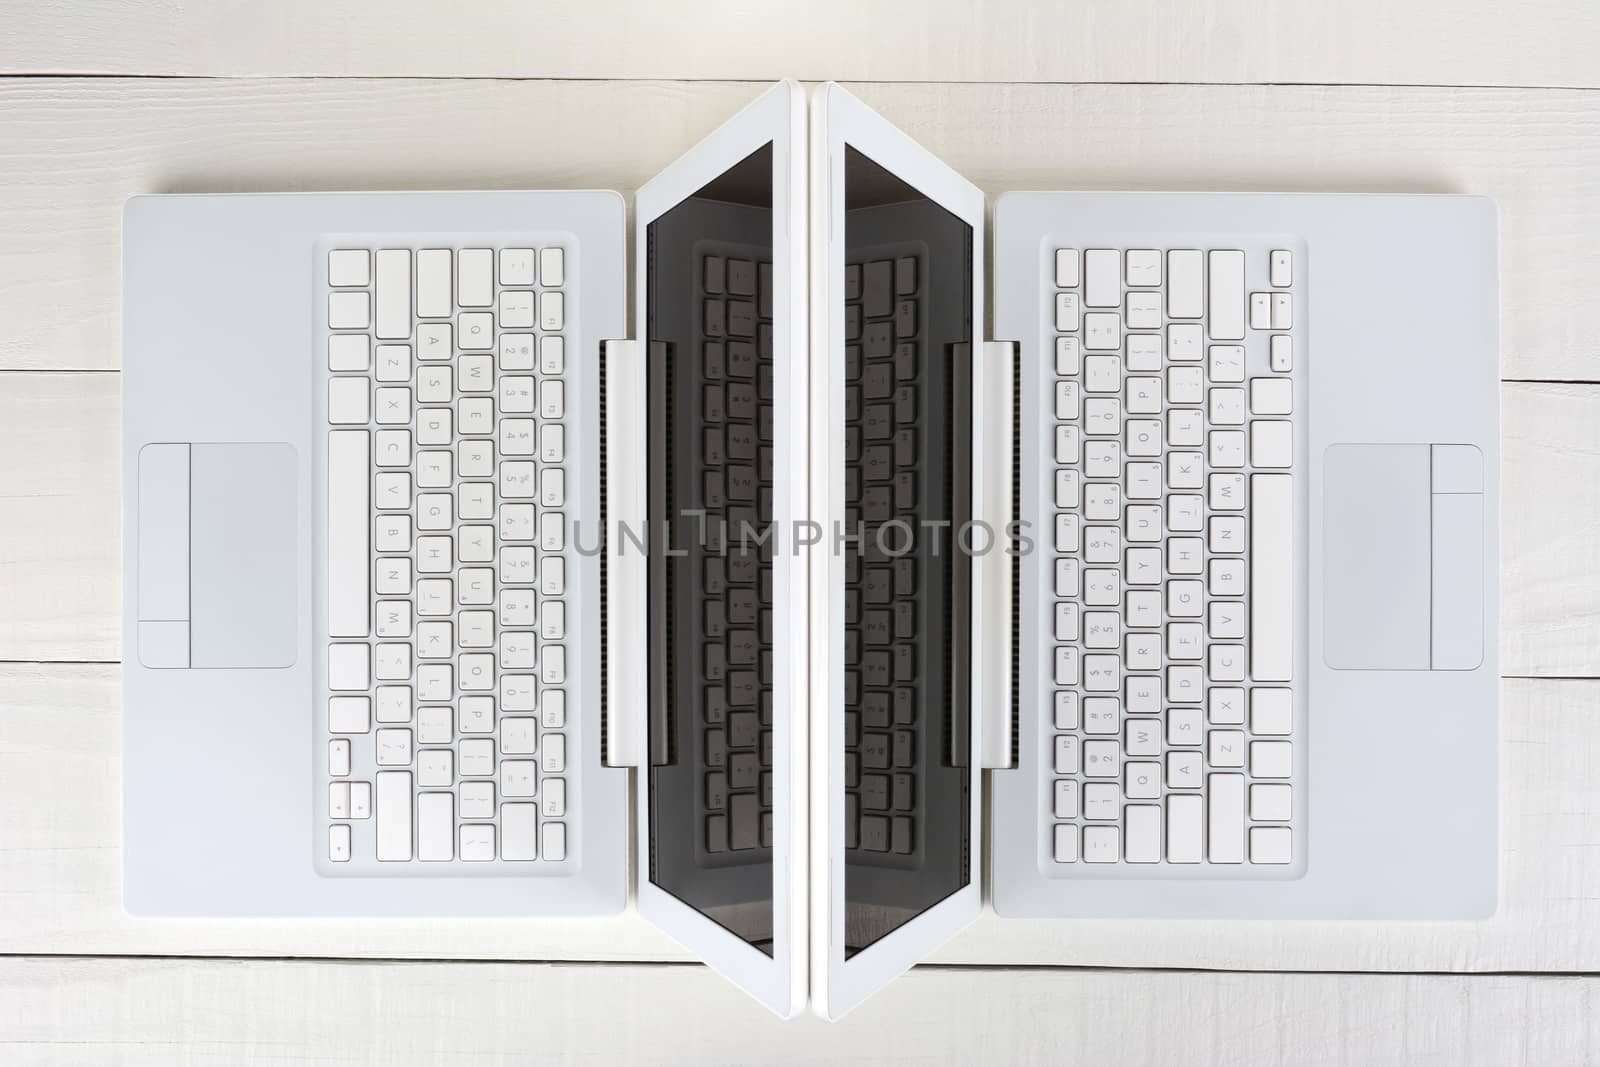 High angle shot of two white laptop computers back-to-back on a white wood table. Horizontal format.